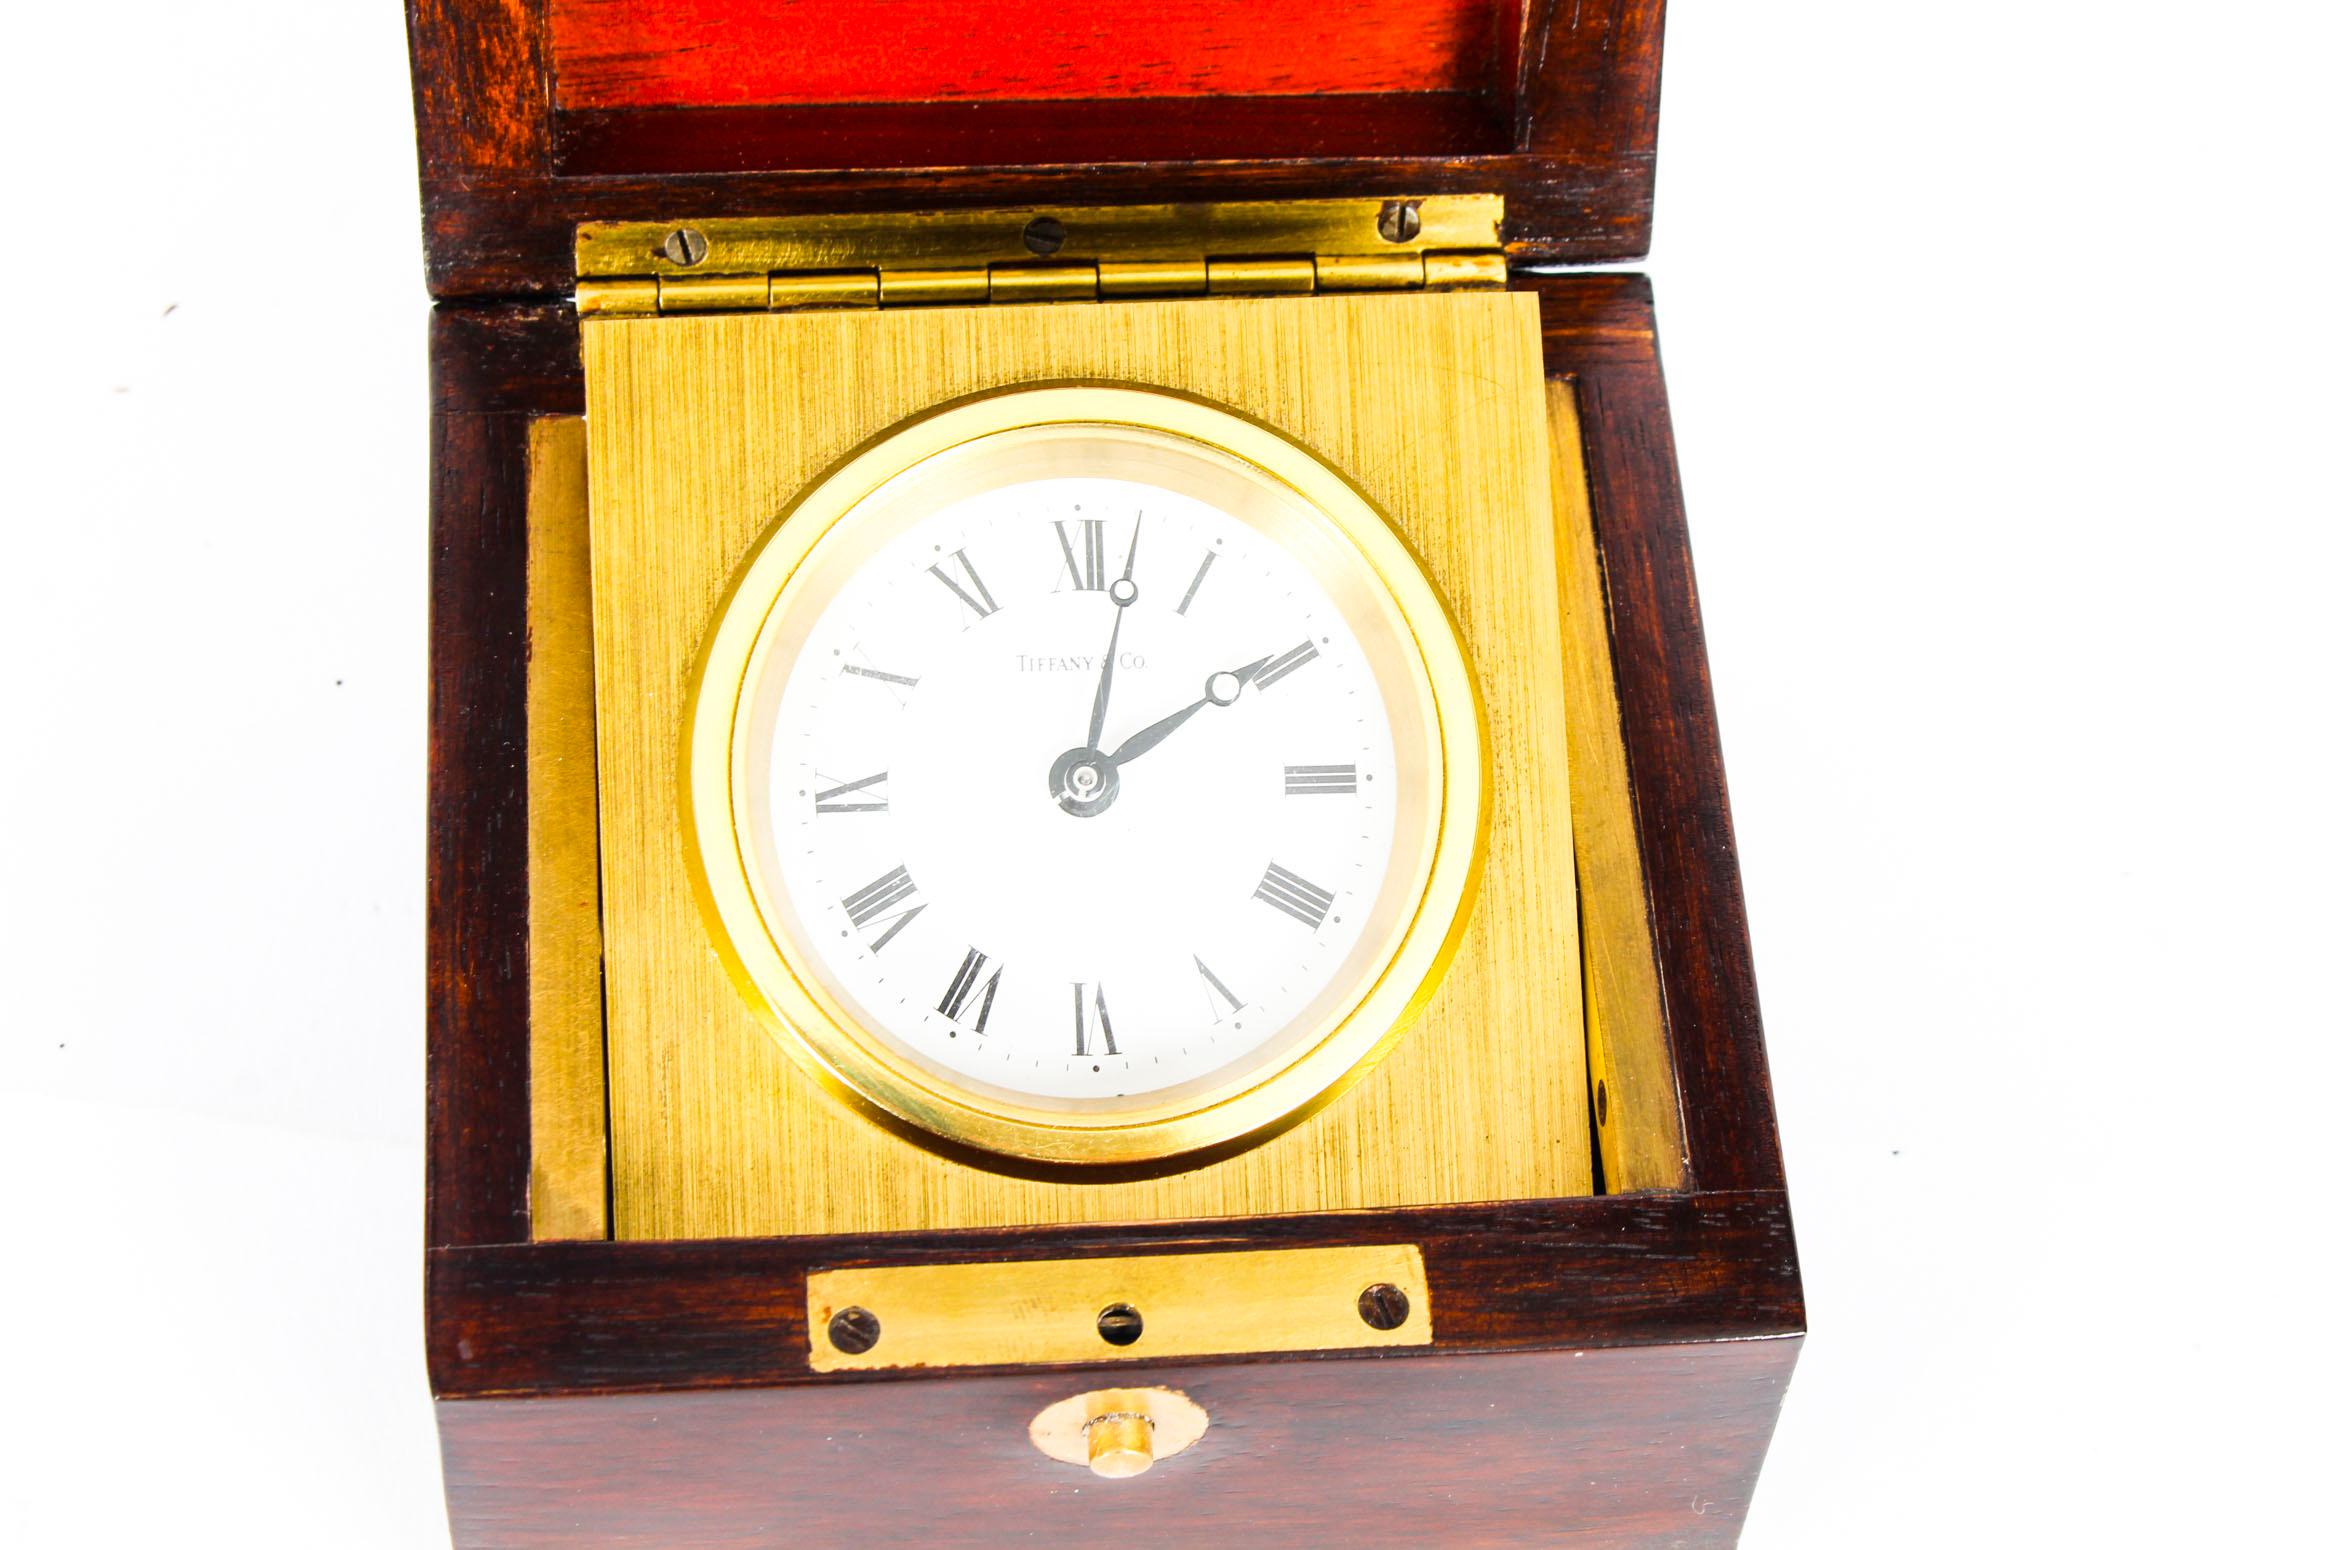 This is a elegant mahogany cased travel clock by the renowned manufacturer and retailer, Tiffany & Co, circa 1950s in date.

The brass-mounted casket opens up to reveal a brushed brass swing case framing a round white enameled dial with black